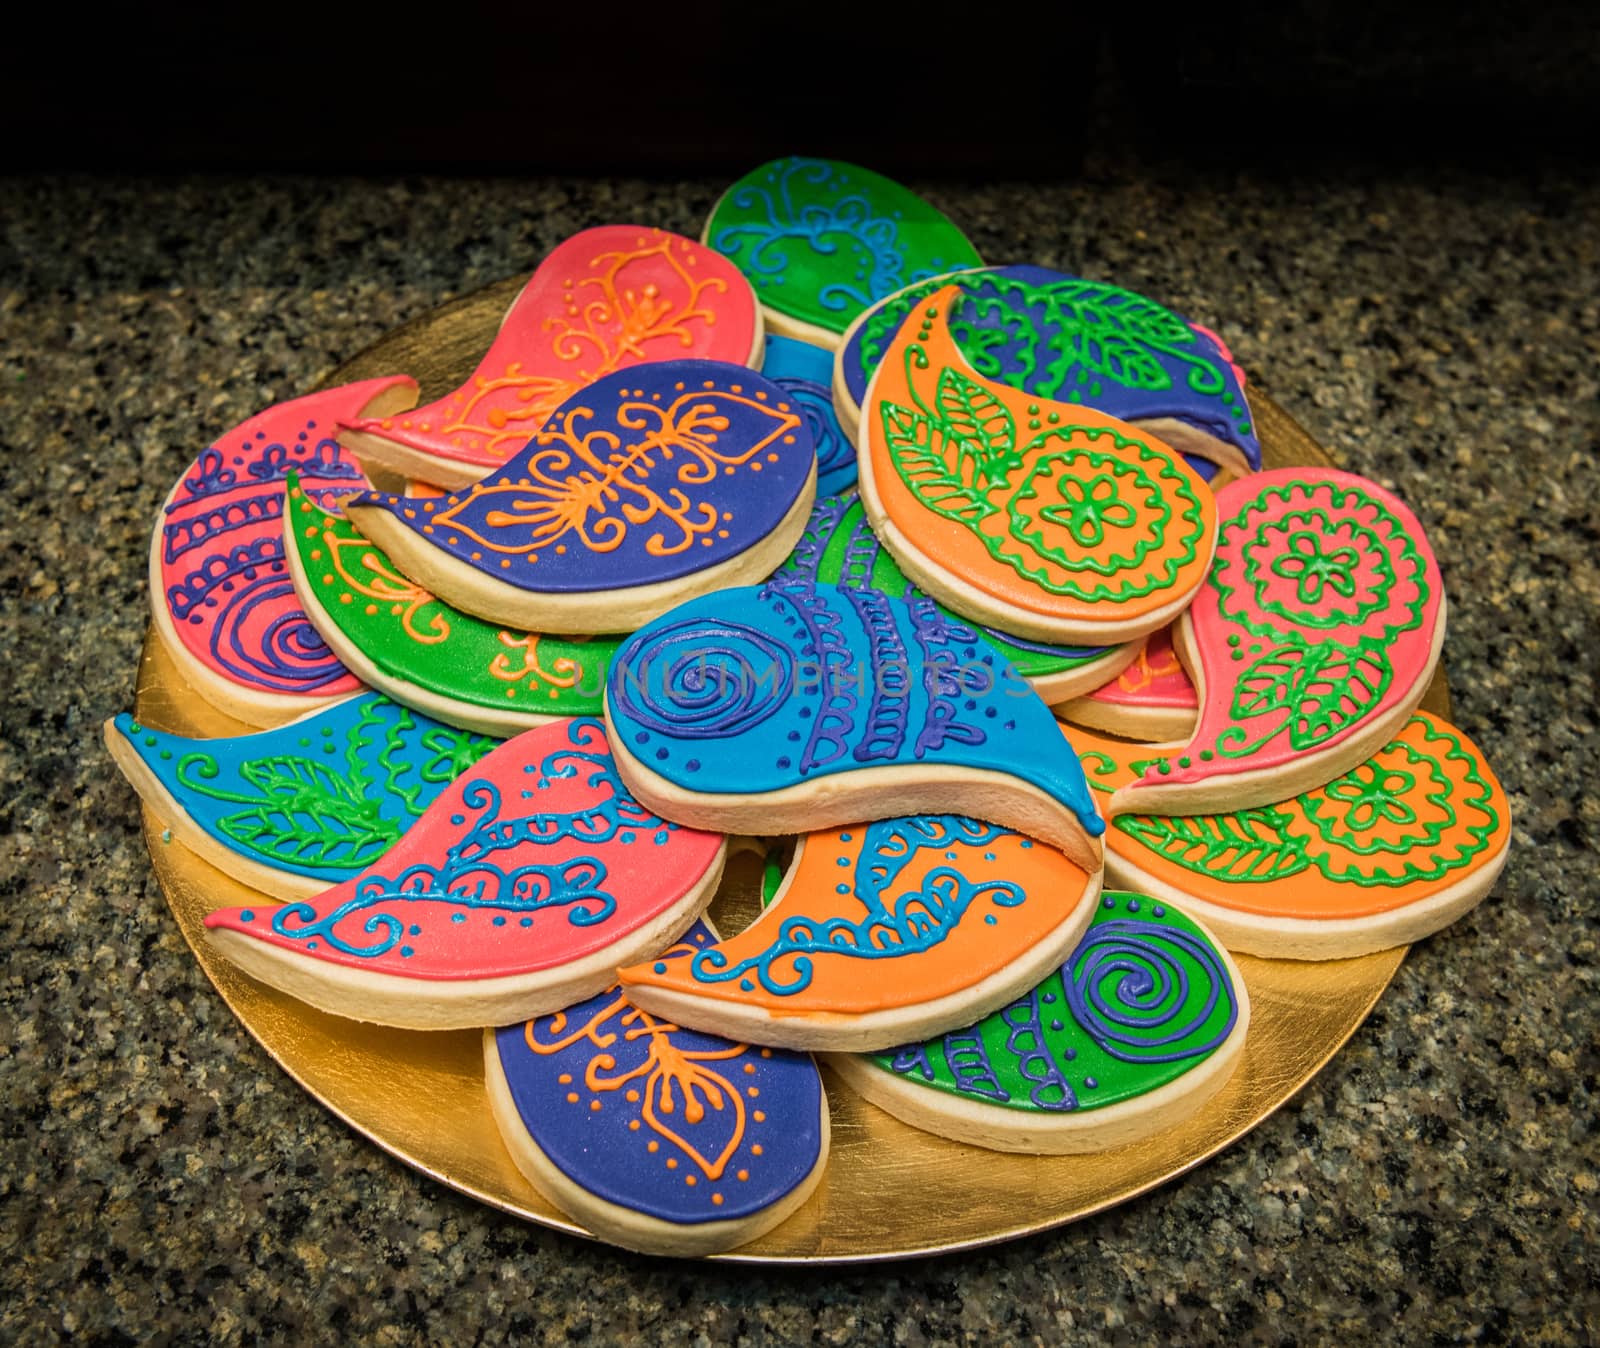 Image of shortbread cookies decorated with colorful icing